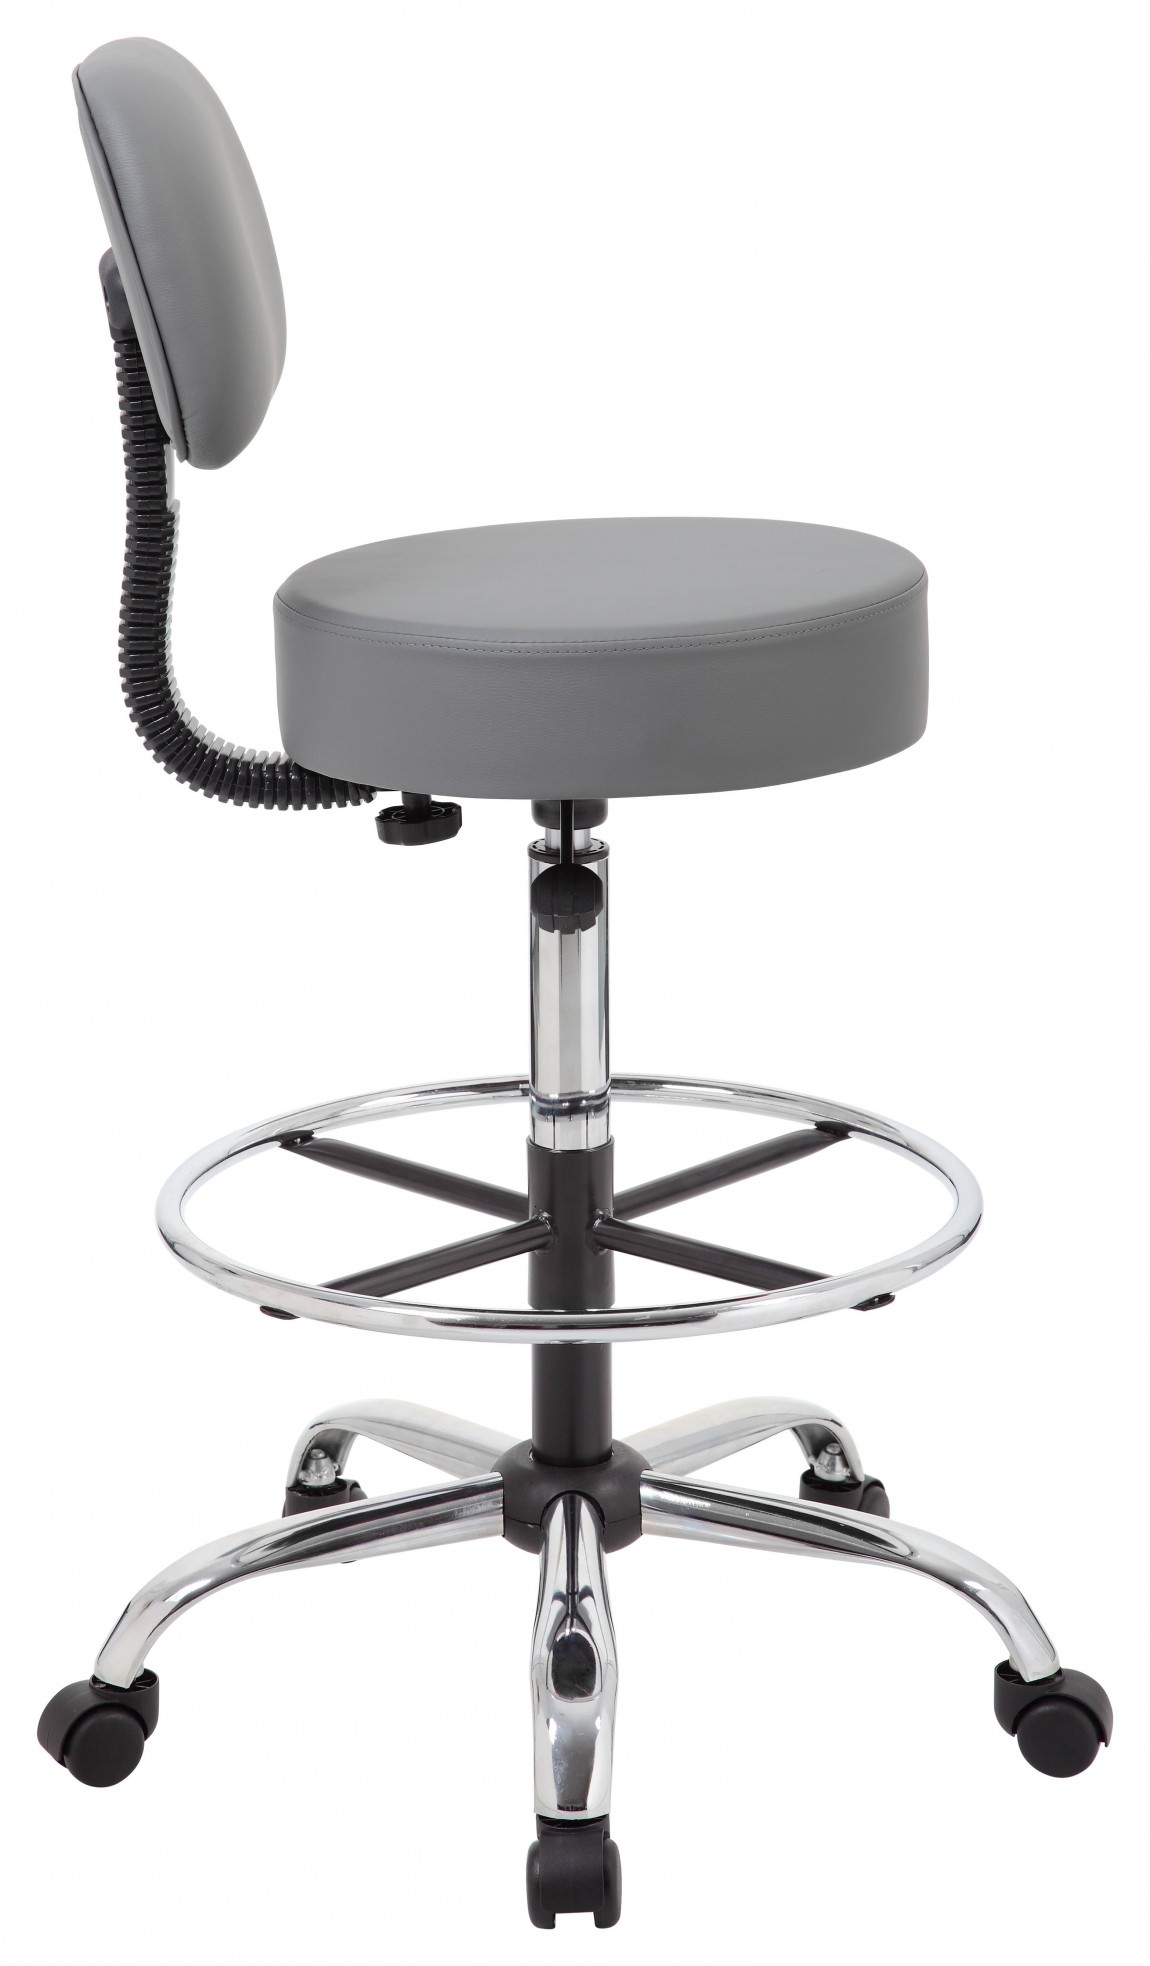 Tall Medical Stool with Back